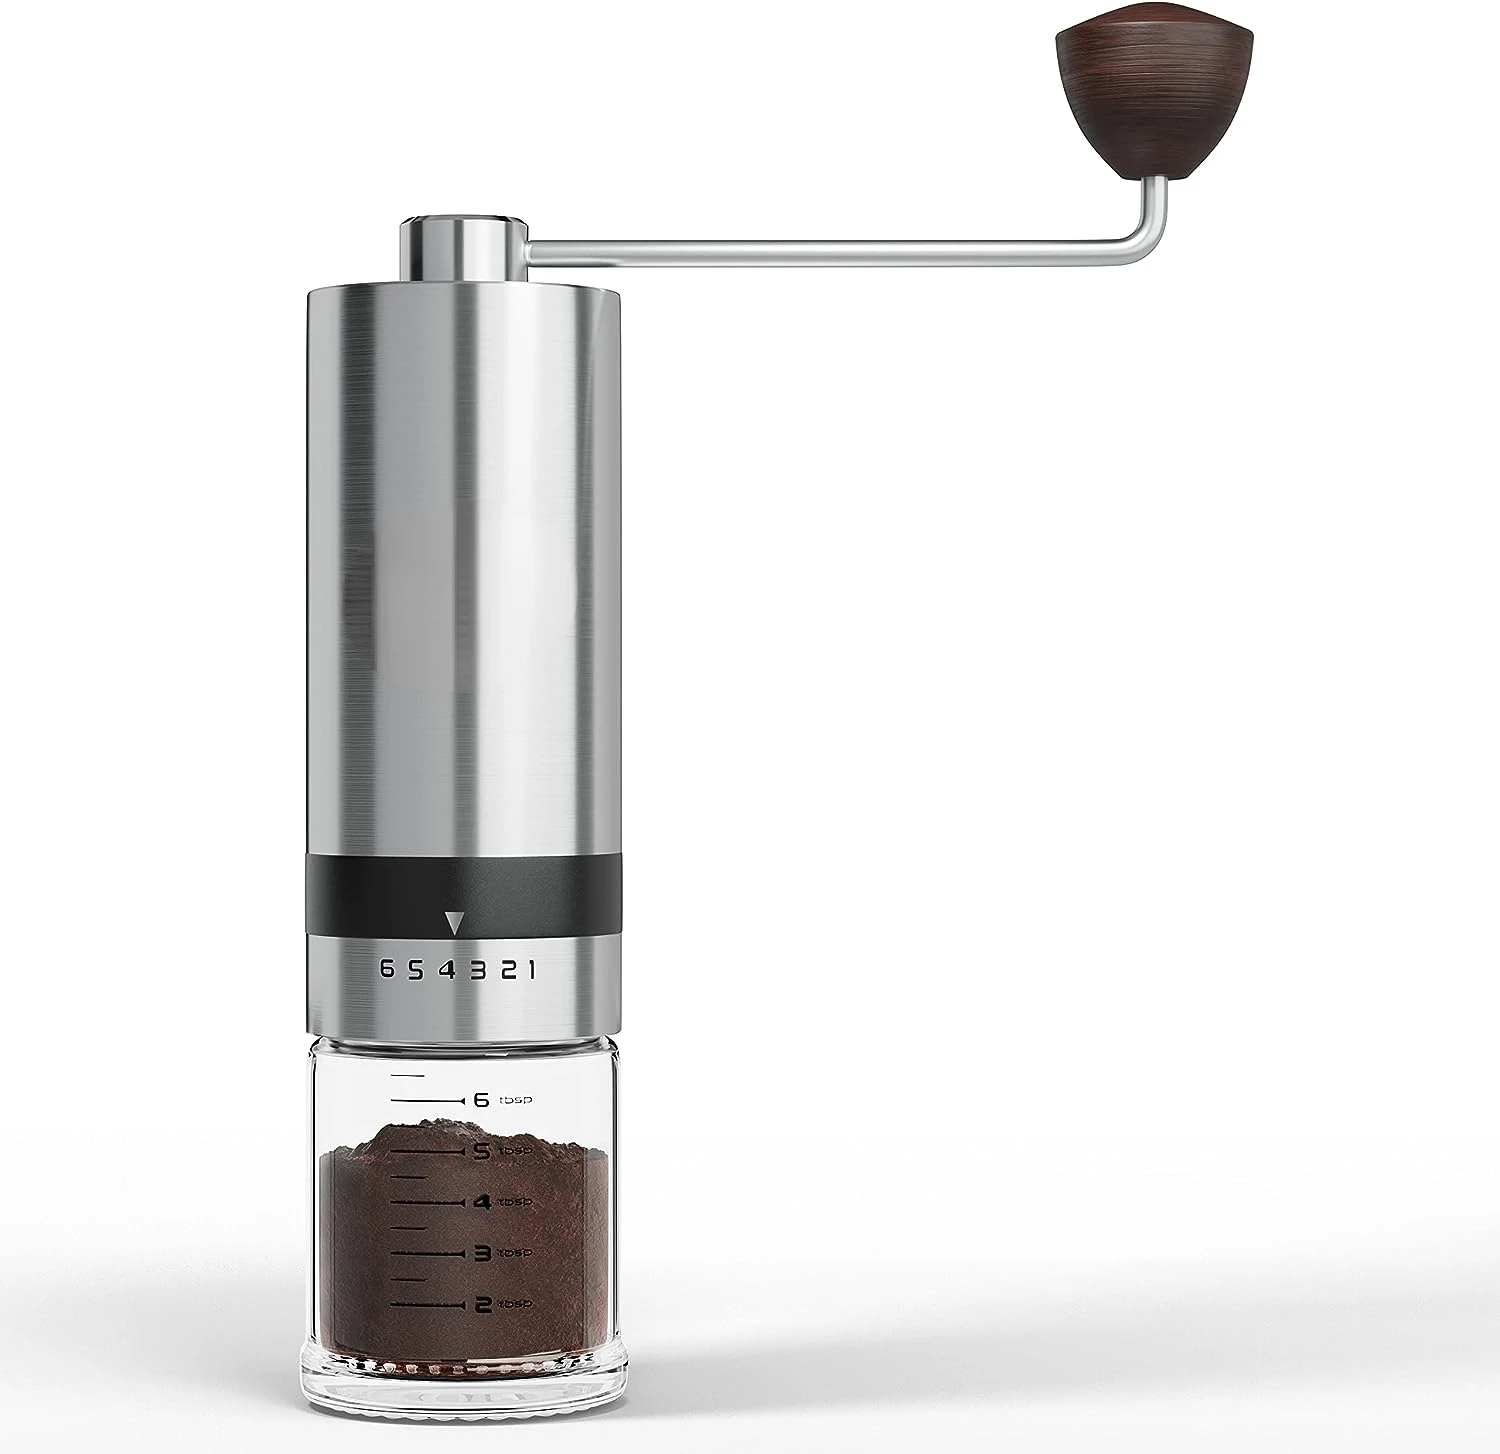 https://ae01.alicdn.com/kf/Sf607547a0c6f4f87a80fbd5e391e6a8e9/Coffee-Grinder-u2014-Hand-Coffee-Grinder-with-Adjustable-Dragon-Tooth-Stainless-Steel-Conical-Burr-No-Power.jpg